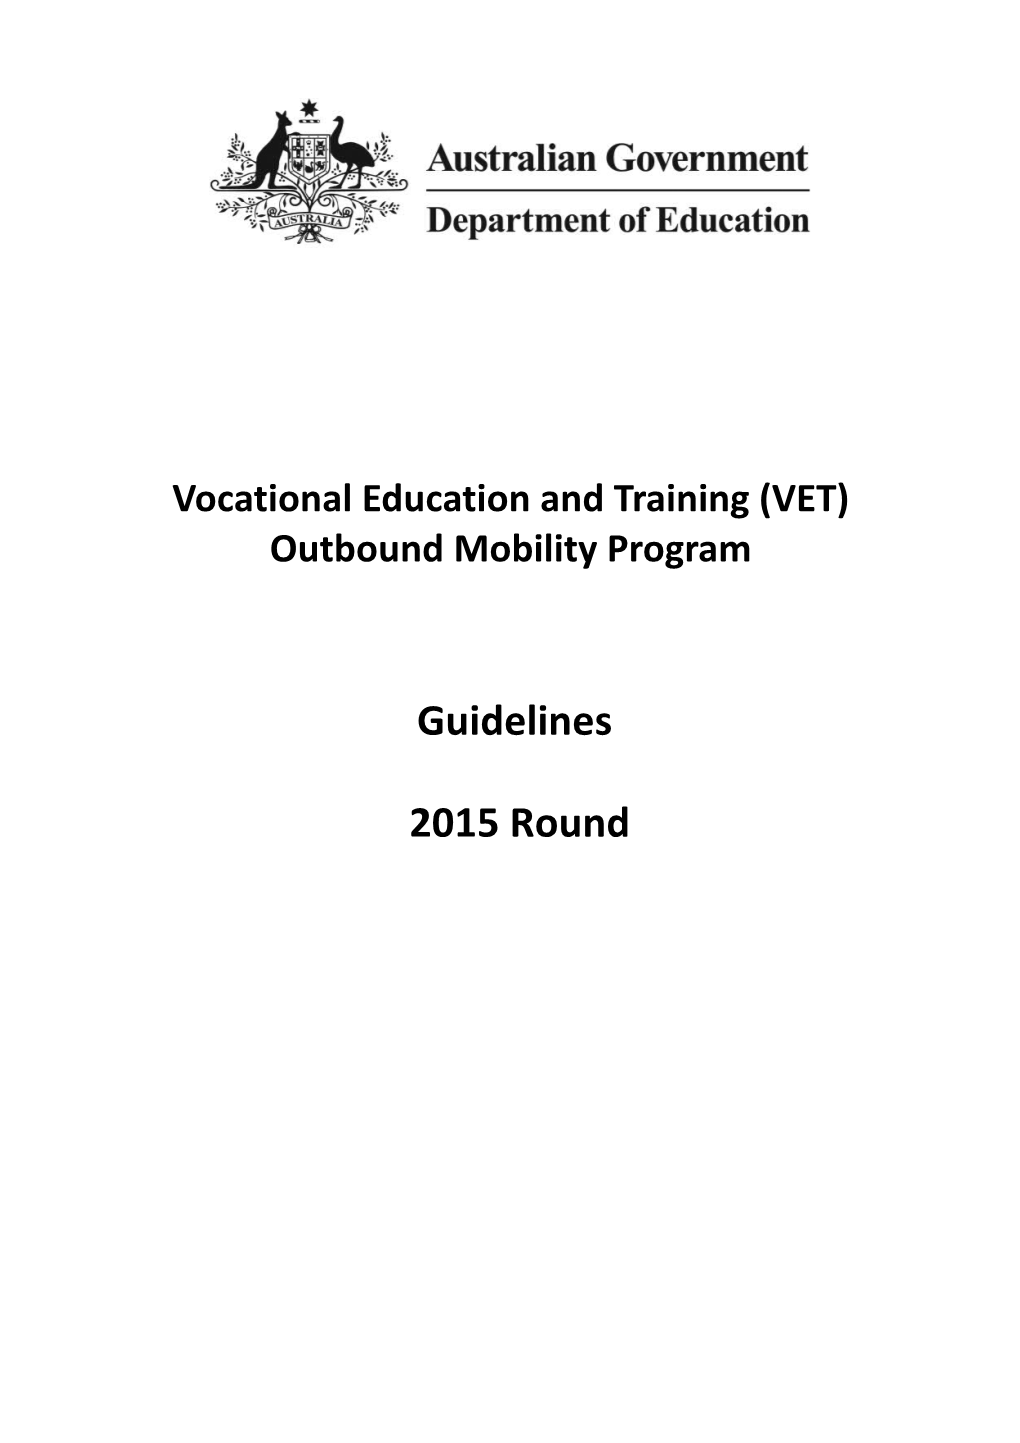 Attachment C - VET Outbound Mobility Guidelines